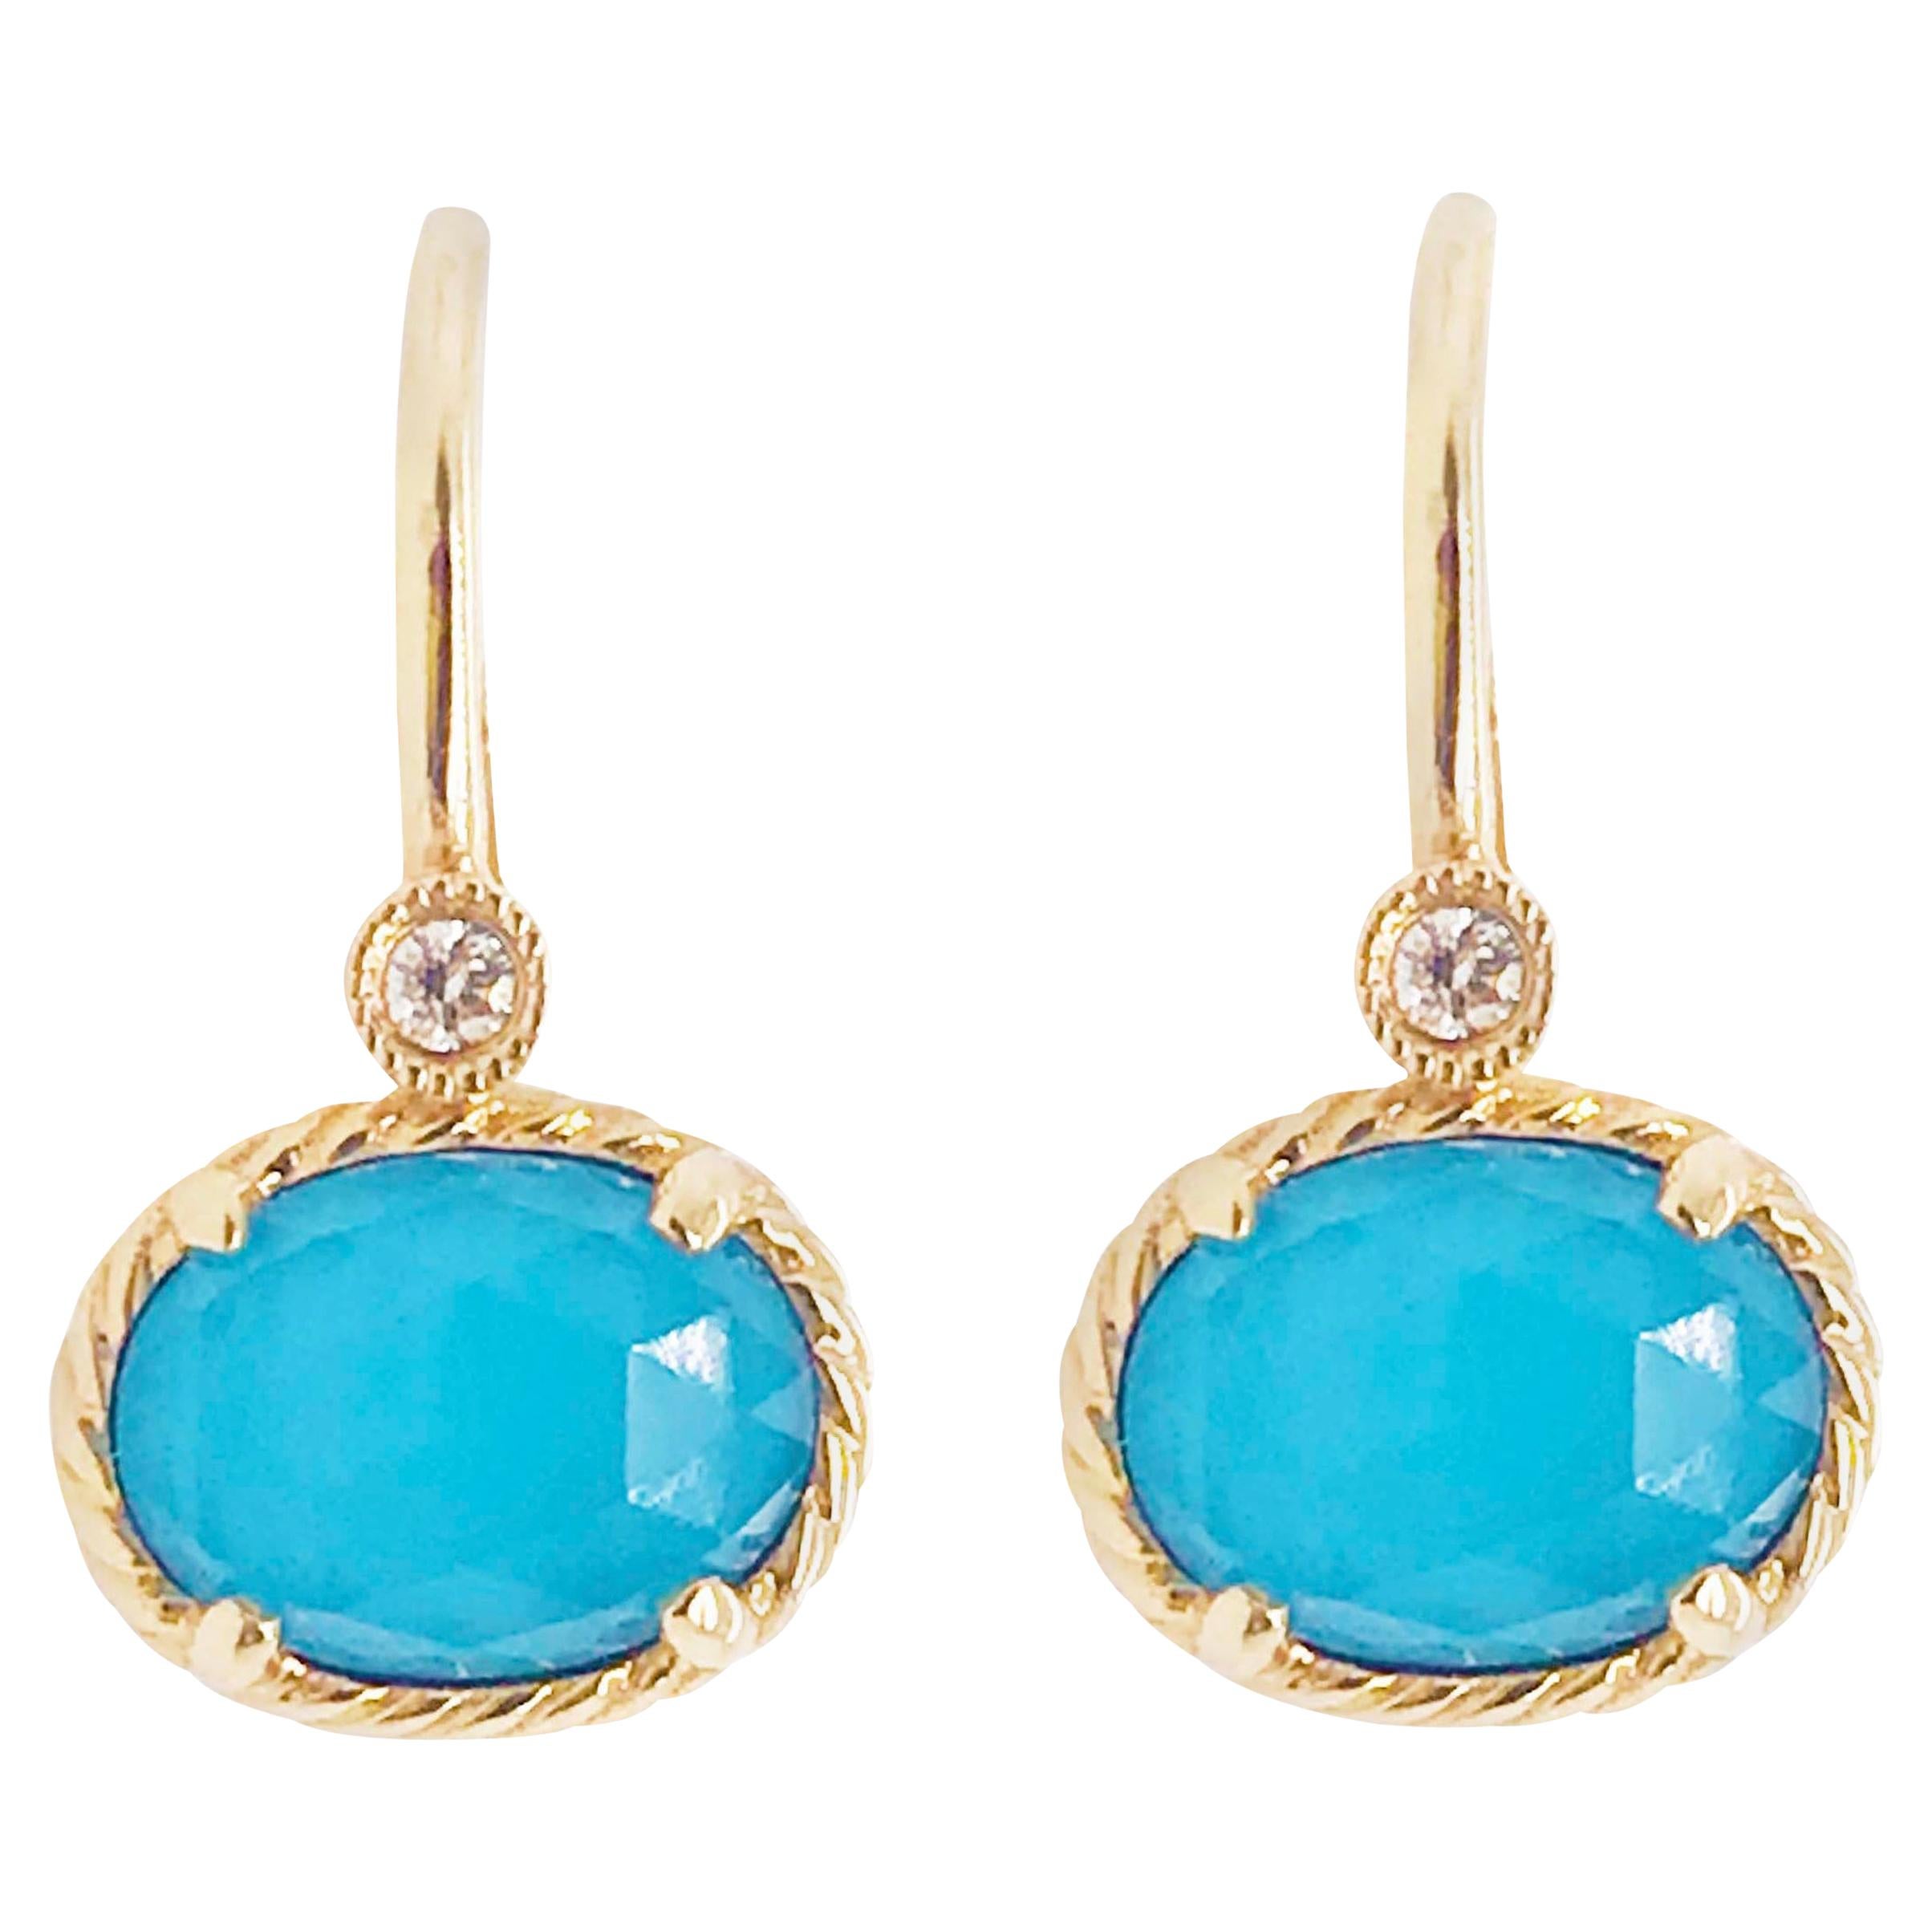 Oval Turquoise Rock Crystal & Diamond Earring Dangles in 14 Karat Gold Turquoise